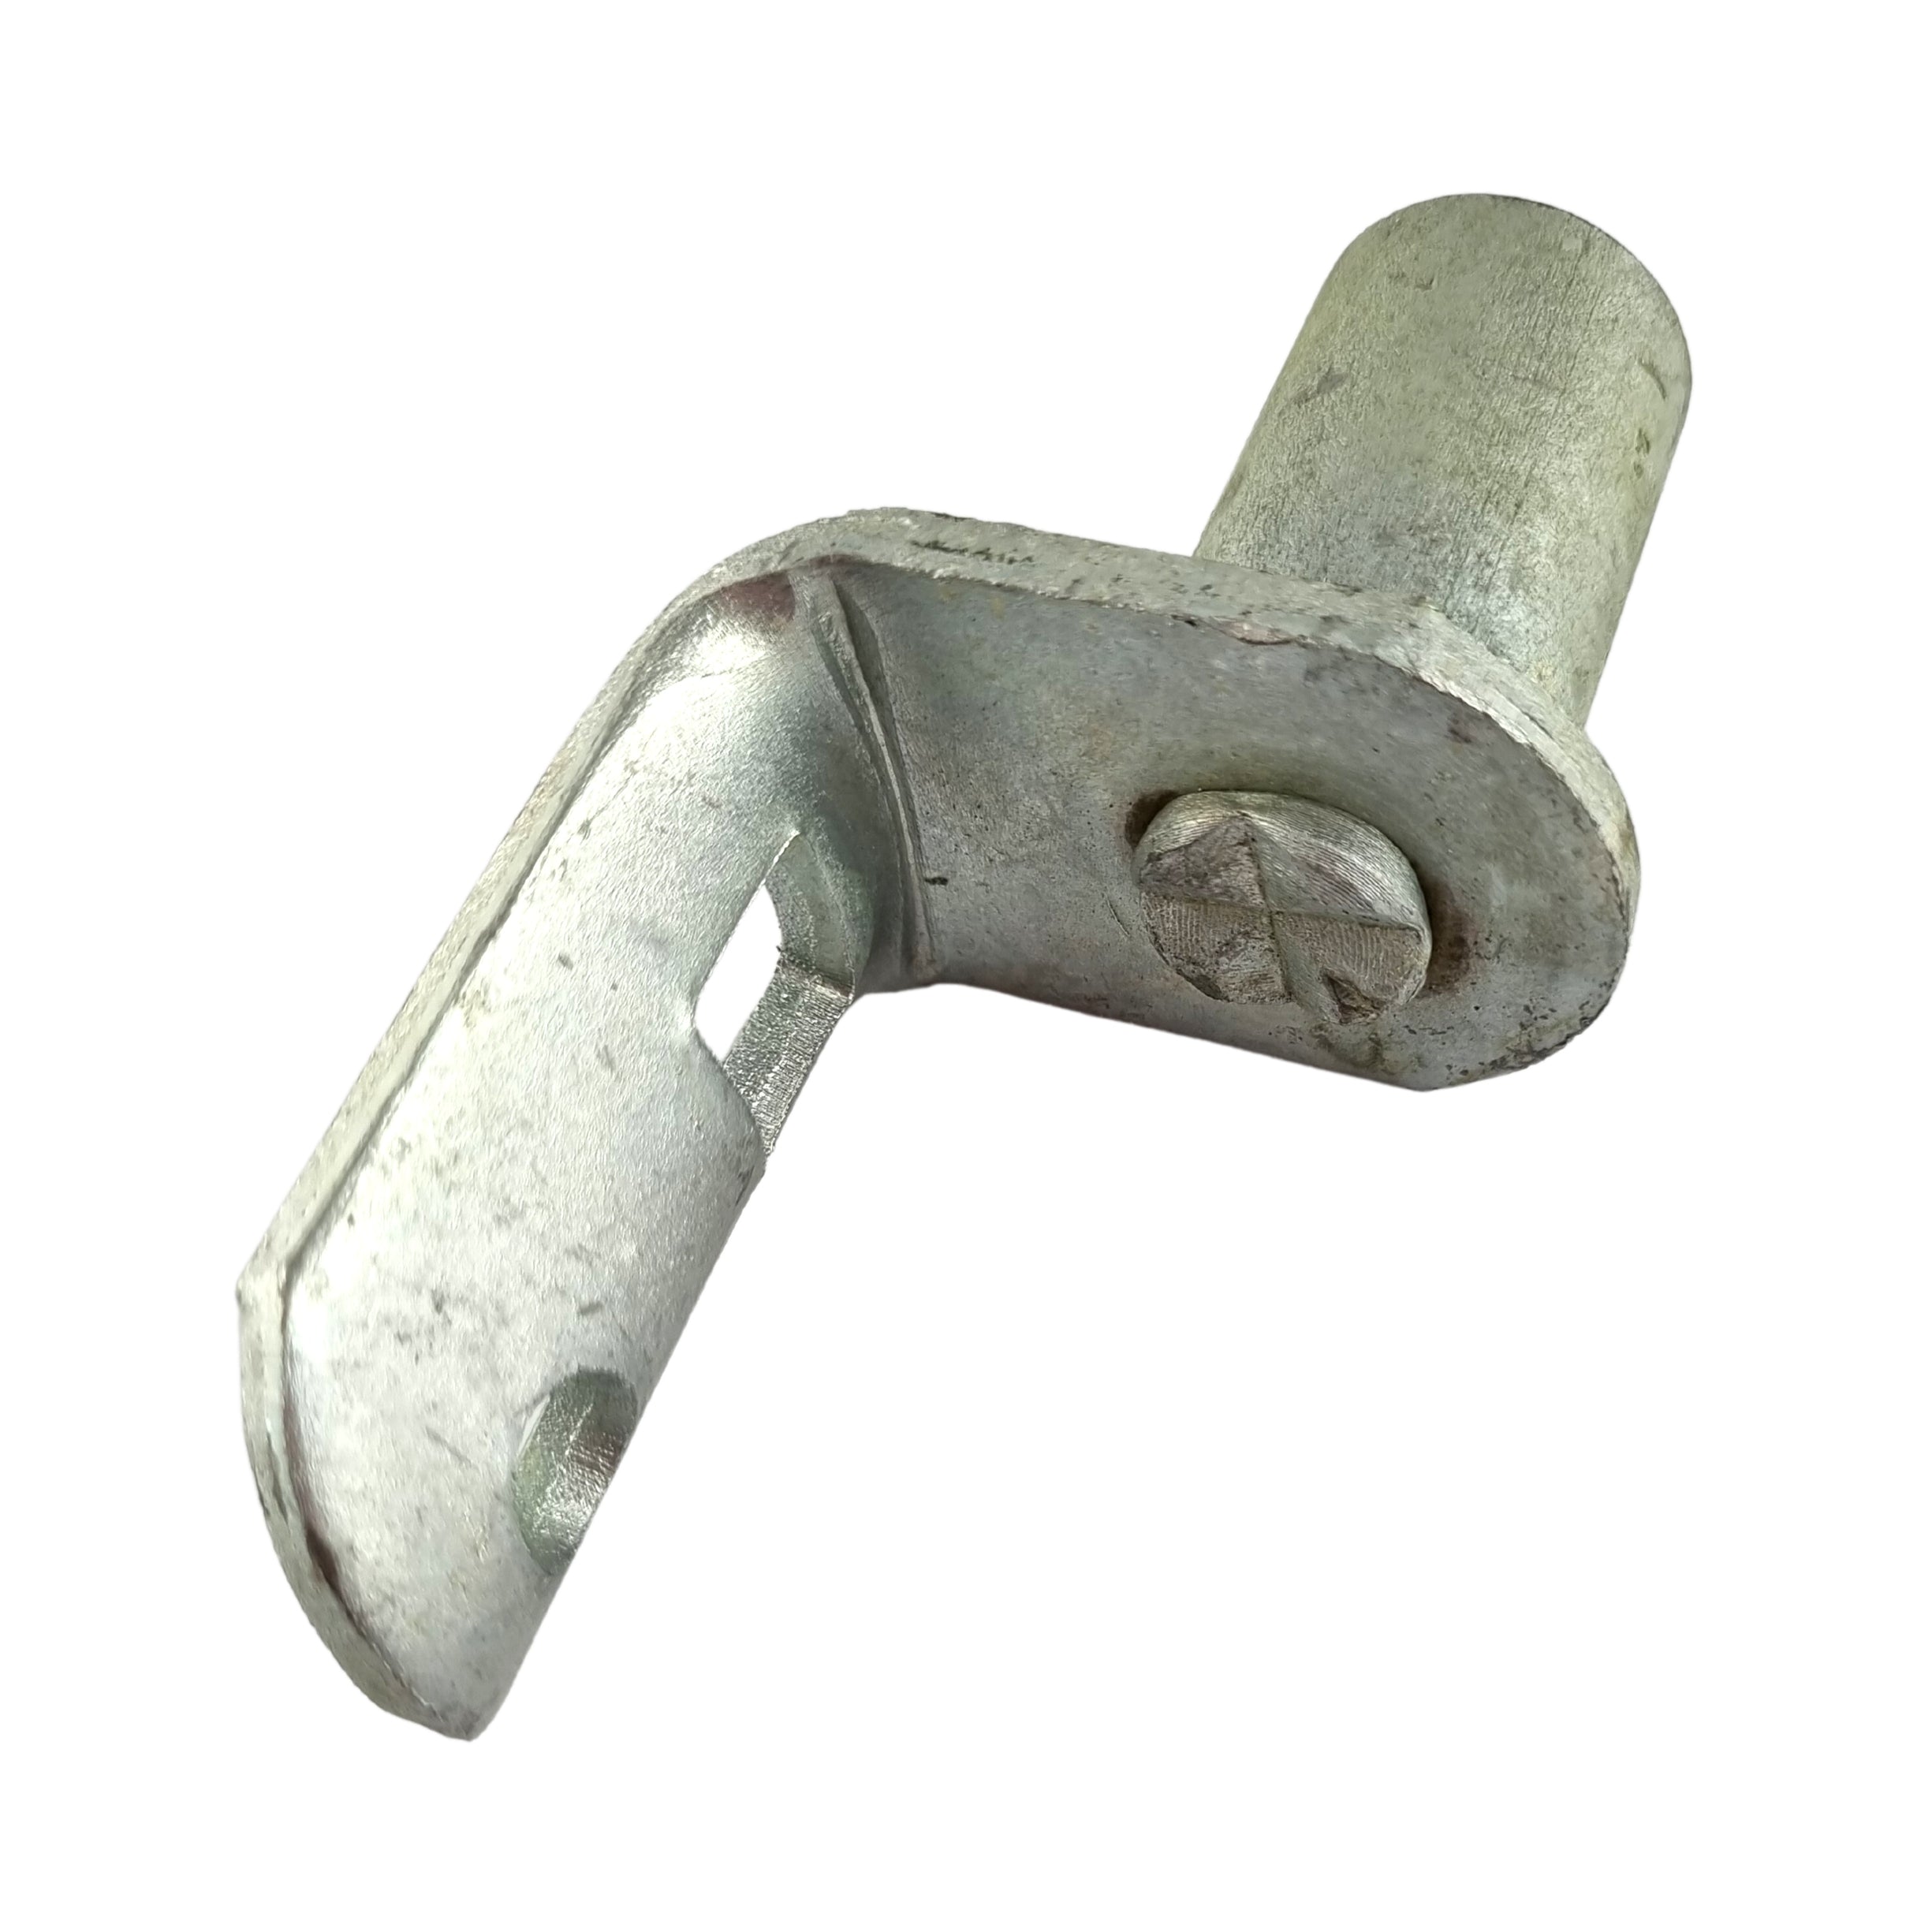 Short Plate Gudgeon - Heavy Duty - Round Flat Post Fitting - Galvanised. Australian made. Shop fence and gate fittings online. Chain.com.au. Australia wide shipping.